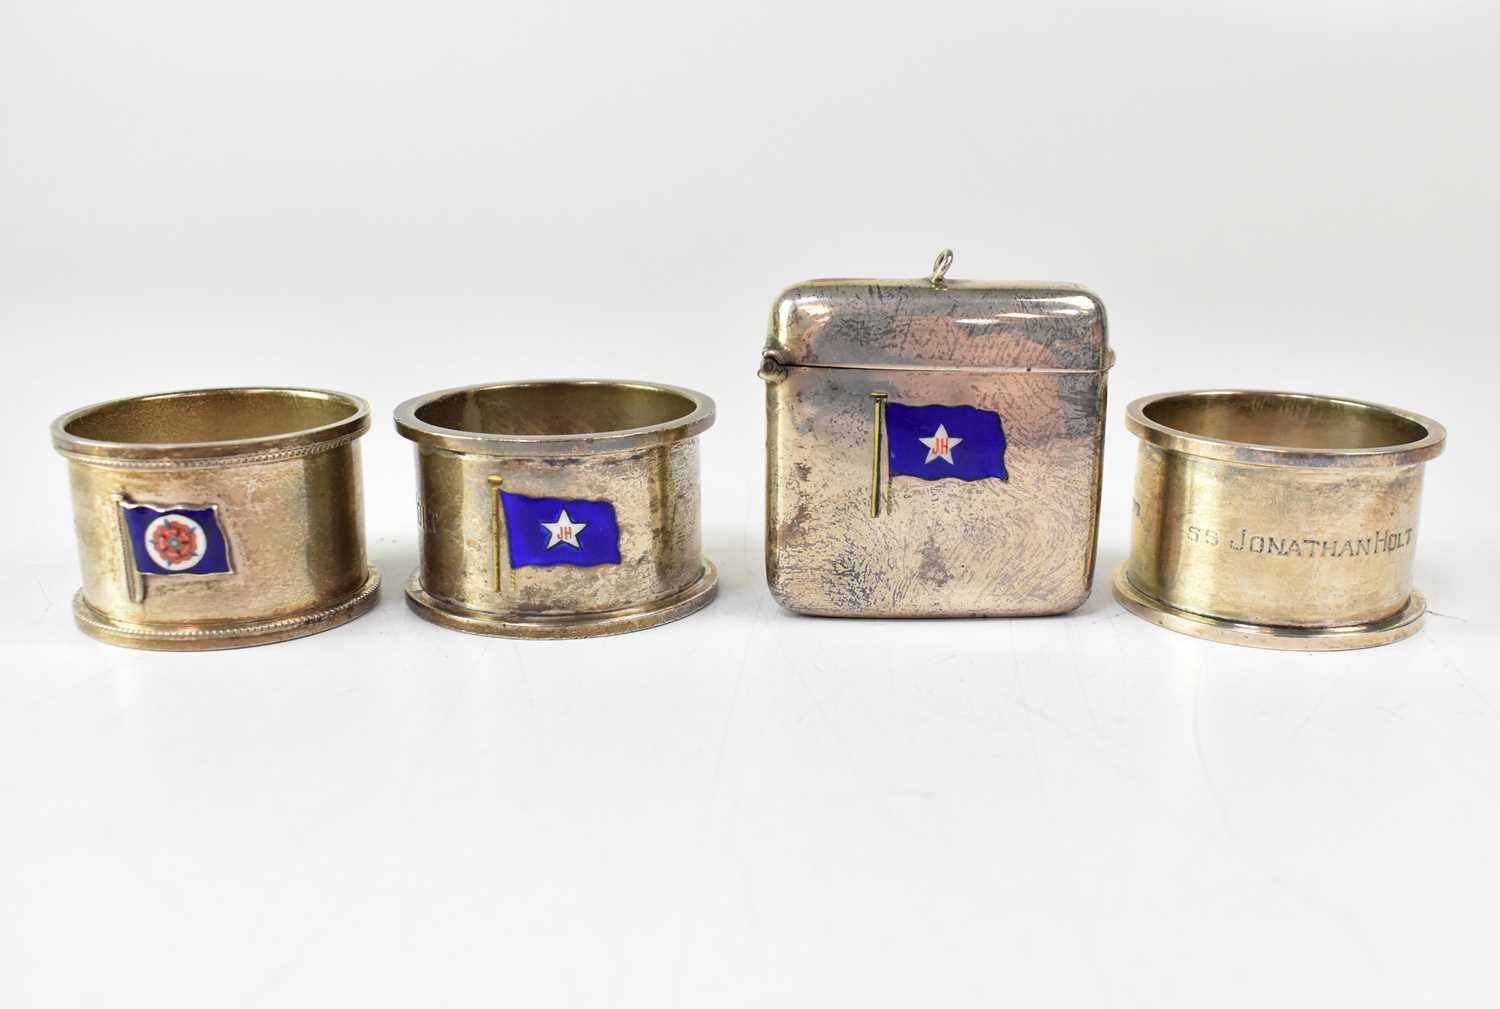 Four silver commemorative items for the John Holt & Co (Liverpool) shipping line, comprising a vesta